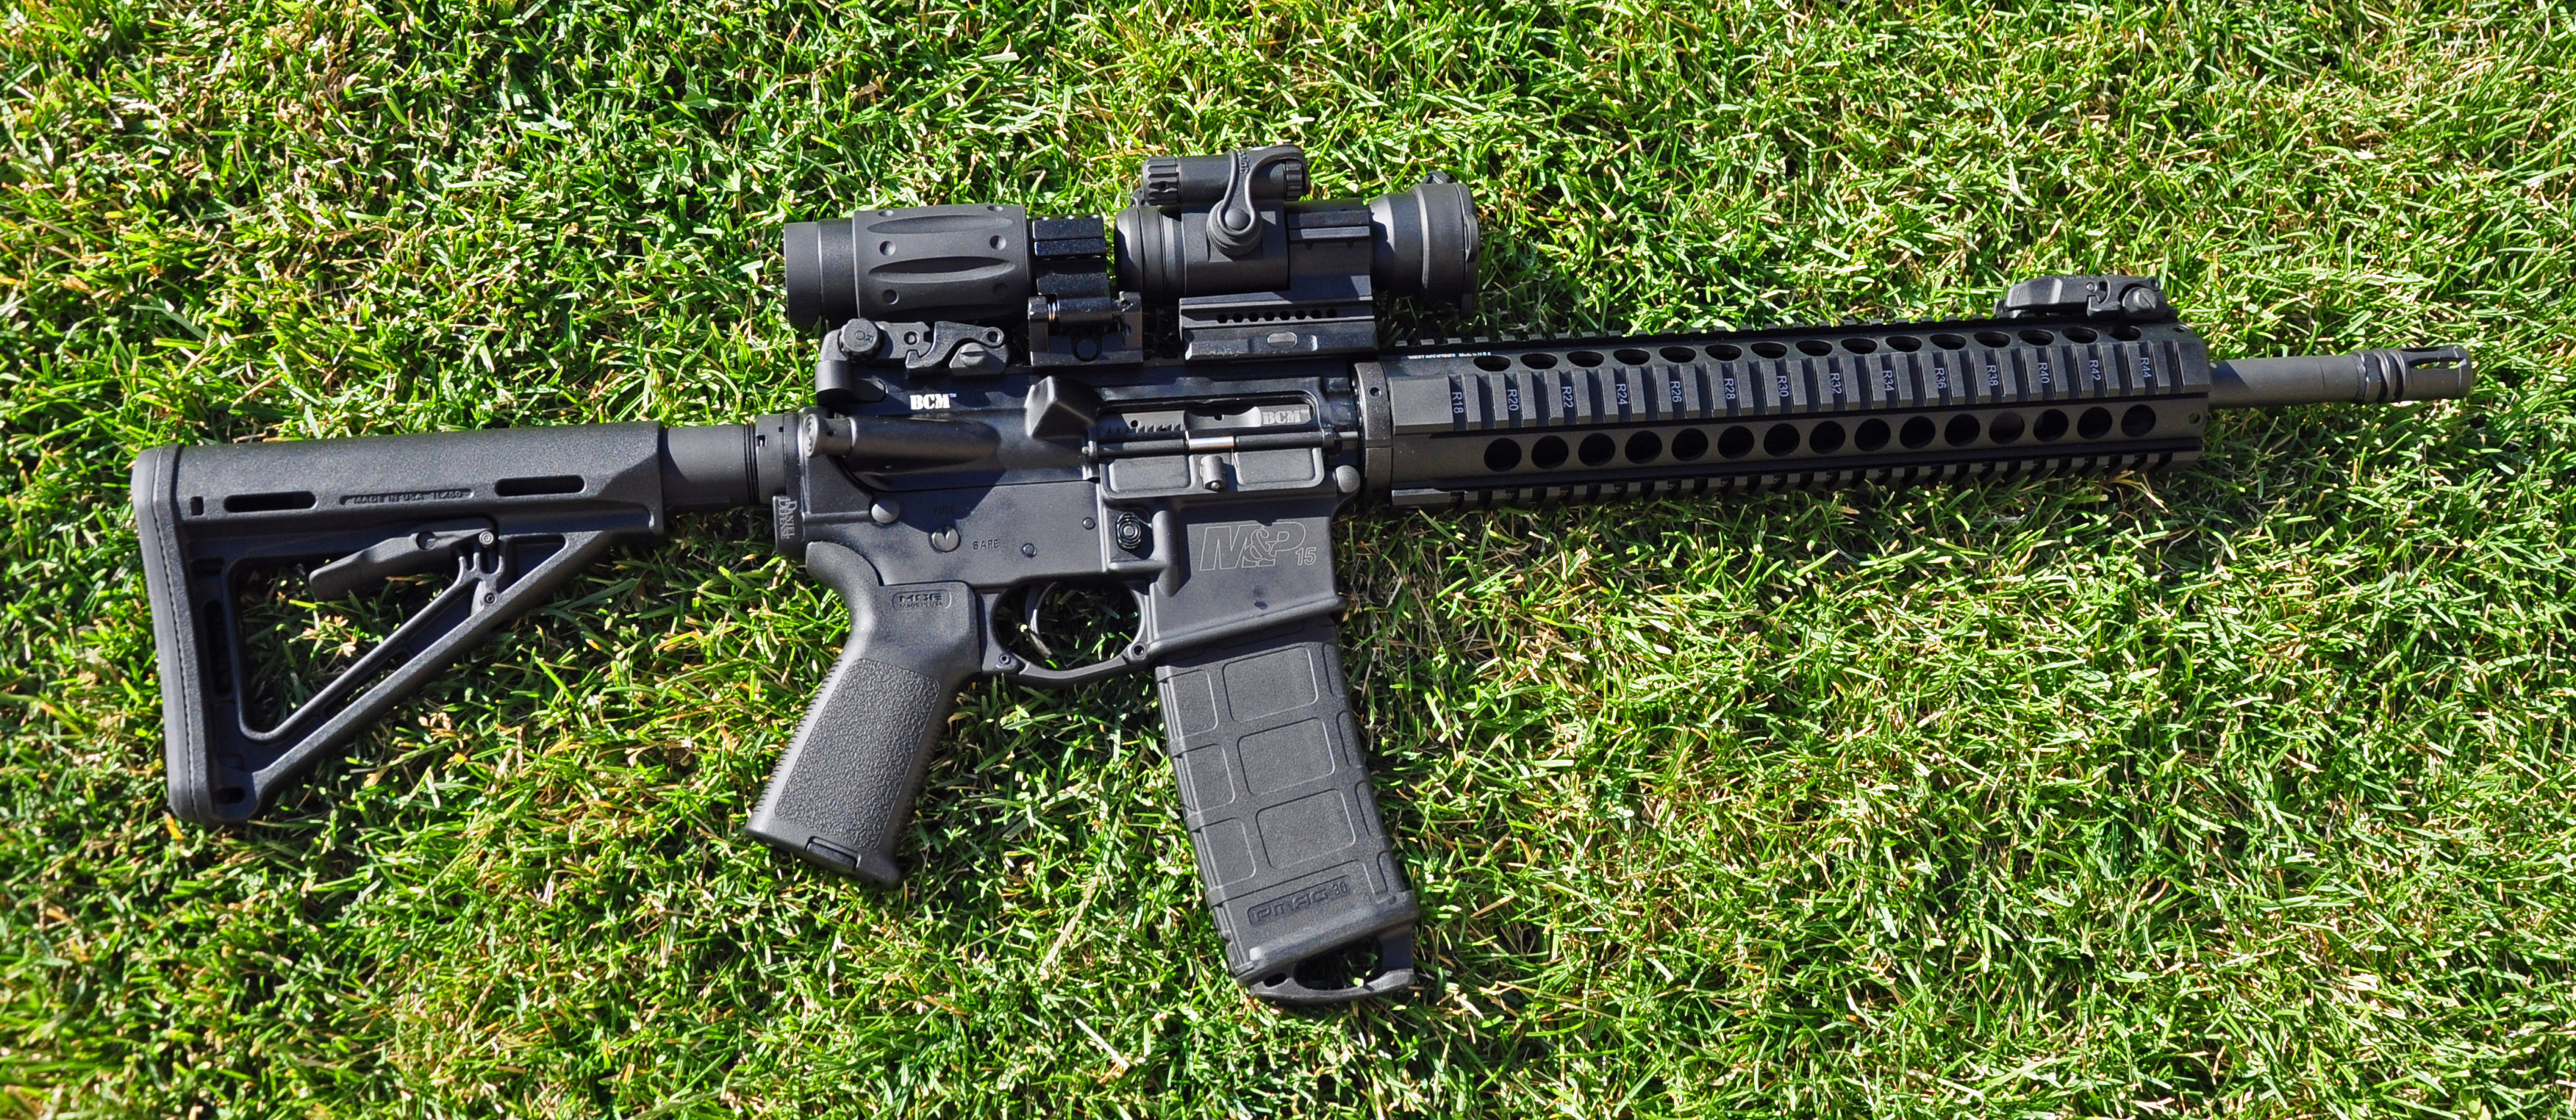 All sizes | AR15 | Flickr - Photo Sharing!